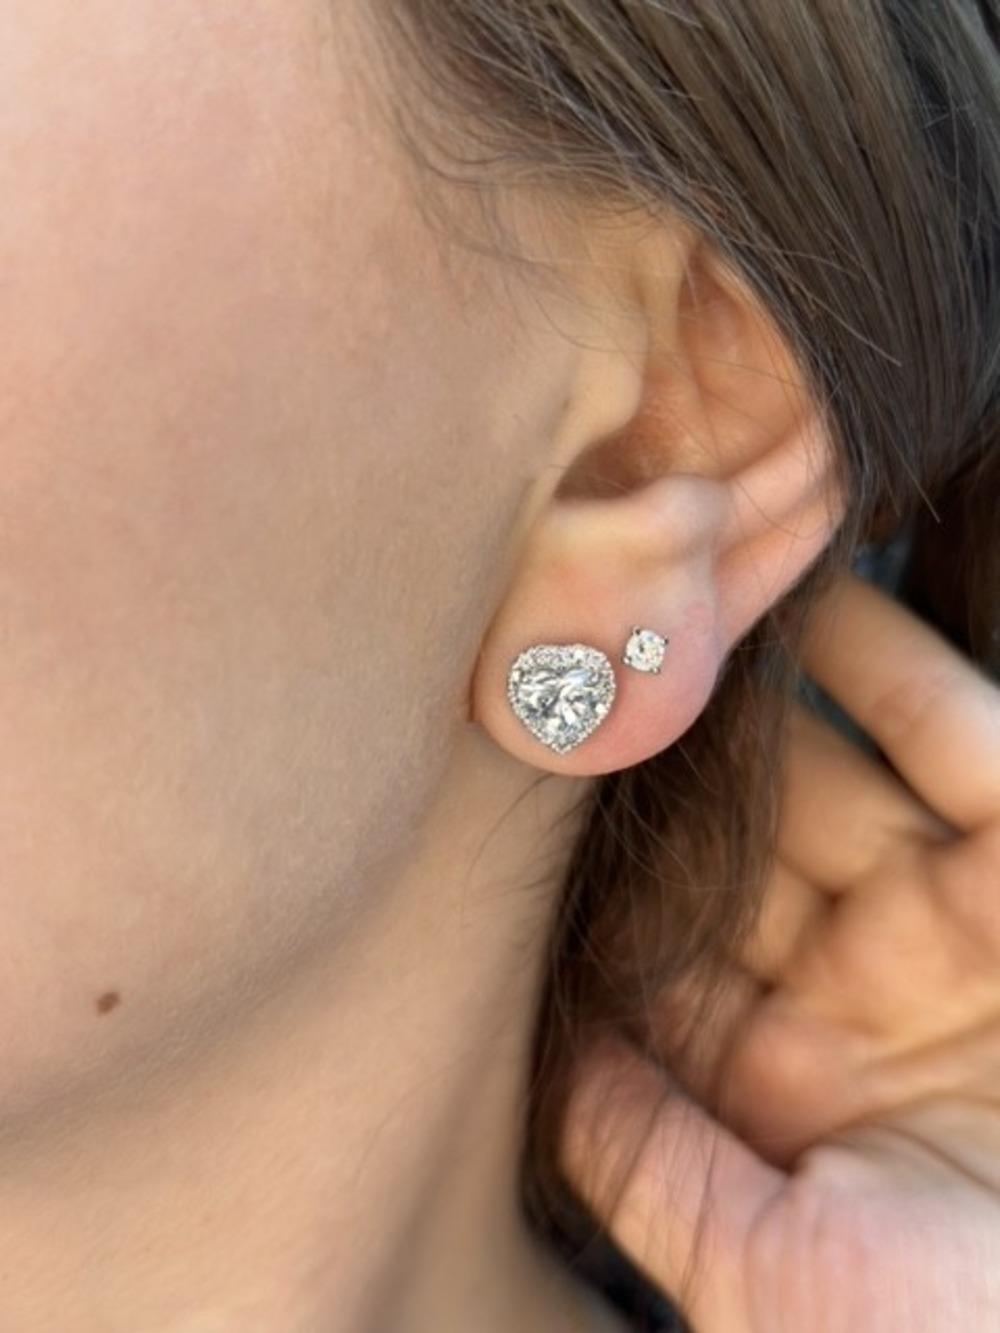 These amazing Heart Shape Diamond Halo Studs in 14K White Gold have a center stone with 1 Carat in each earring and surrounding the heart-shaped center stone is a halo of smaller diamonds that add an extra touch of luxury and brilliance. These studs